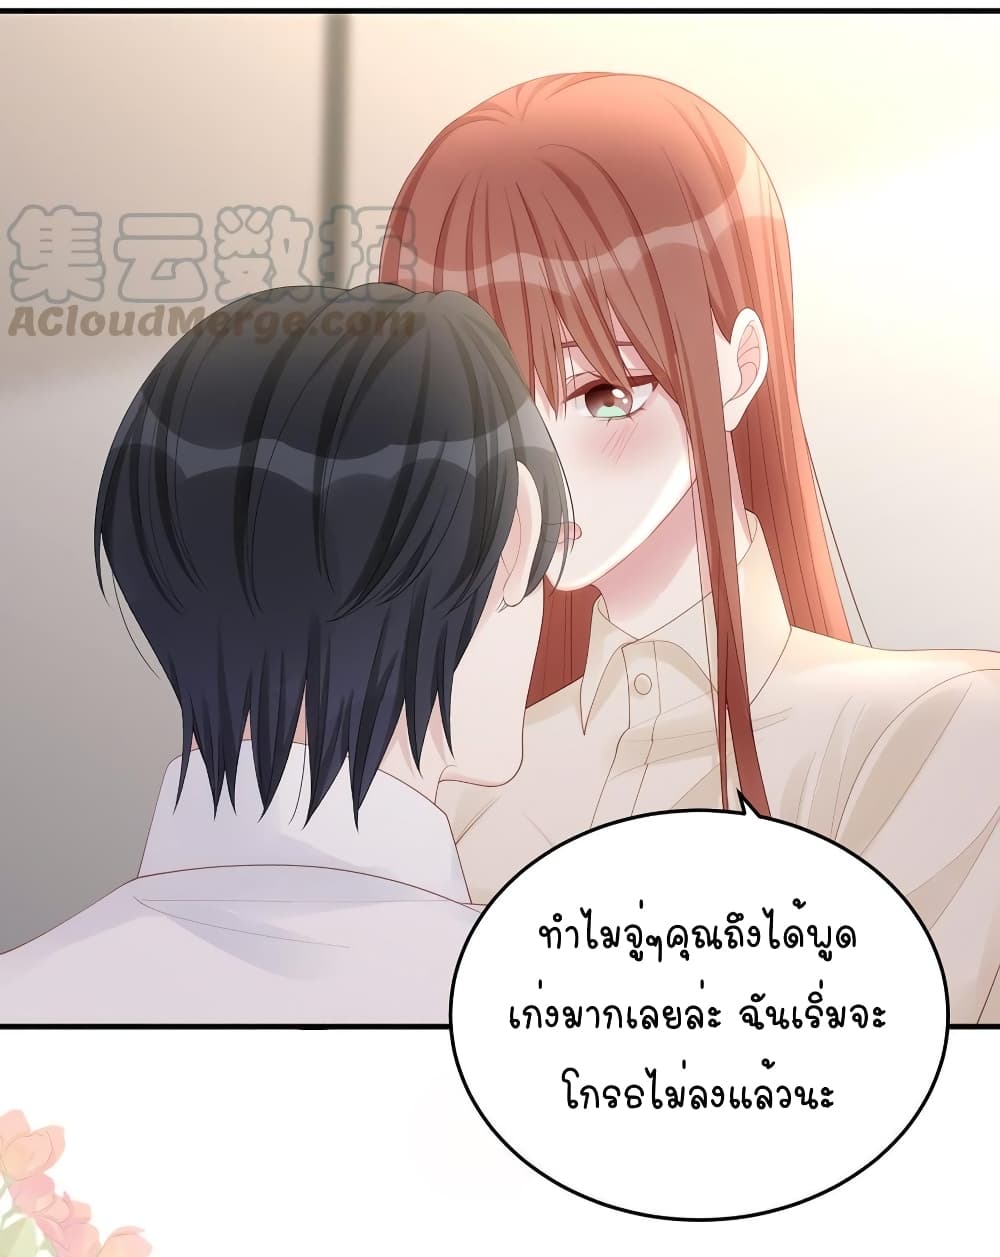 Gonna Spoil You ตอนที่ 76 (34)